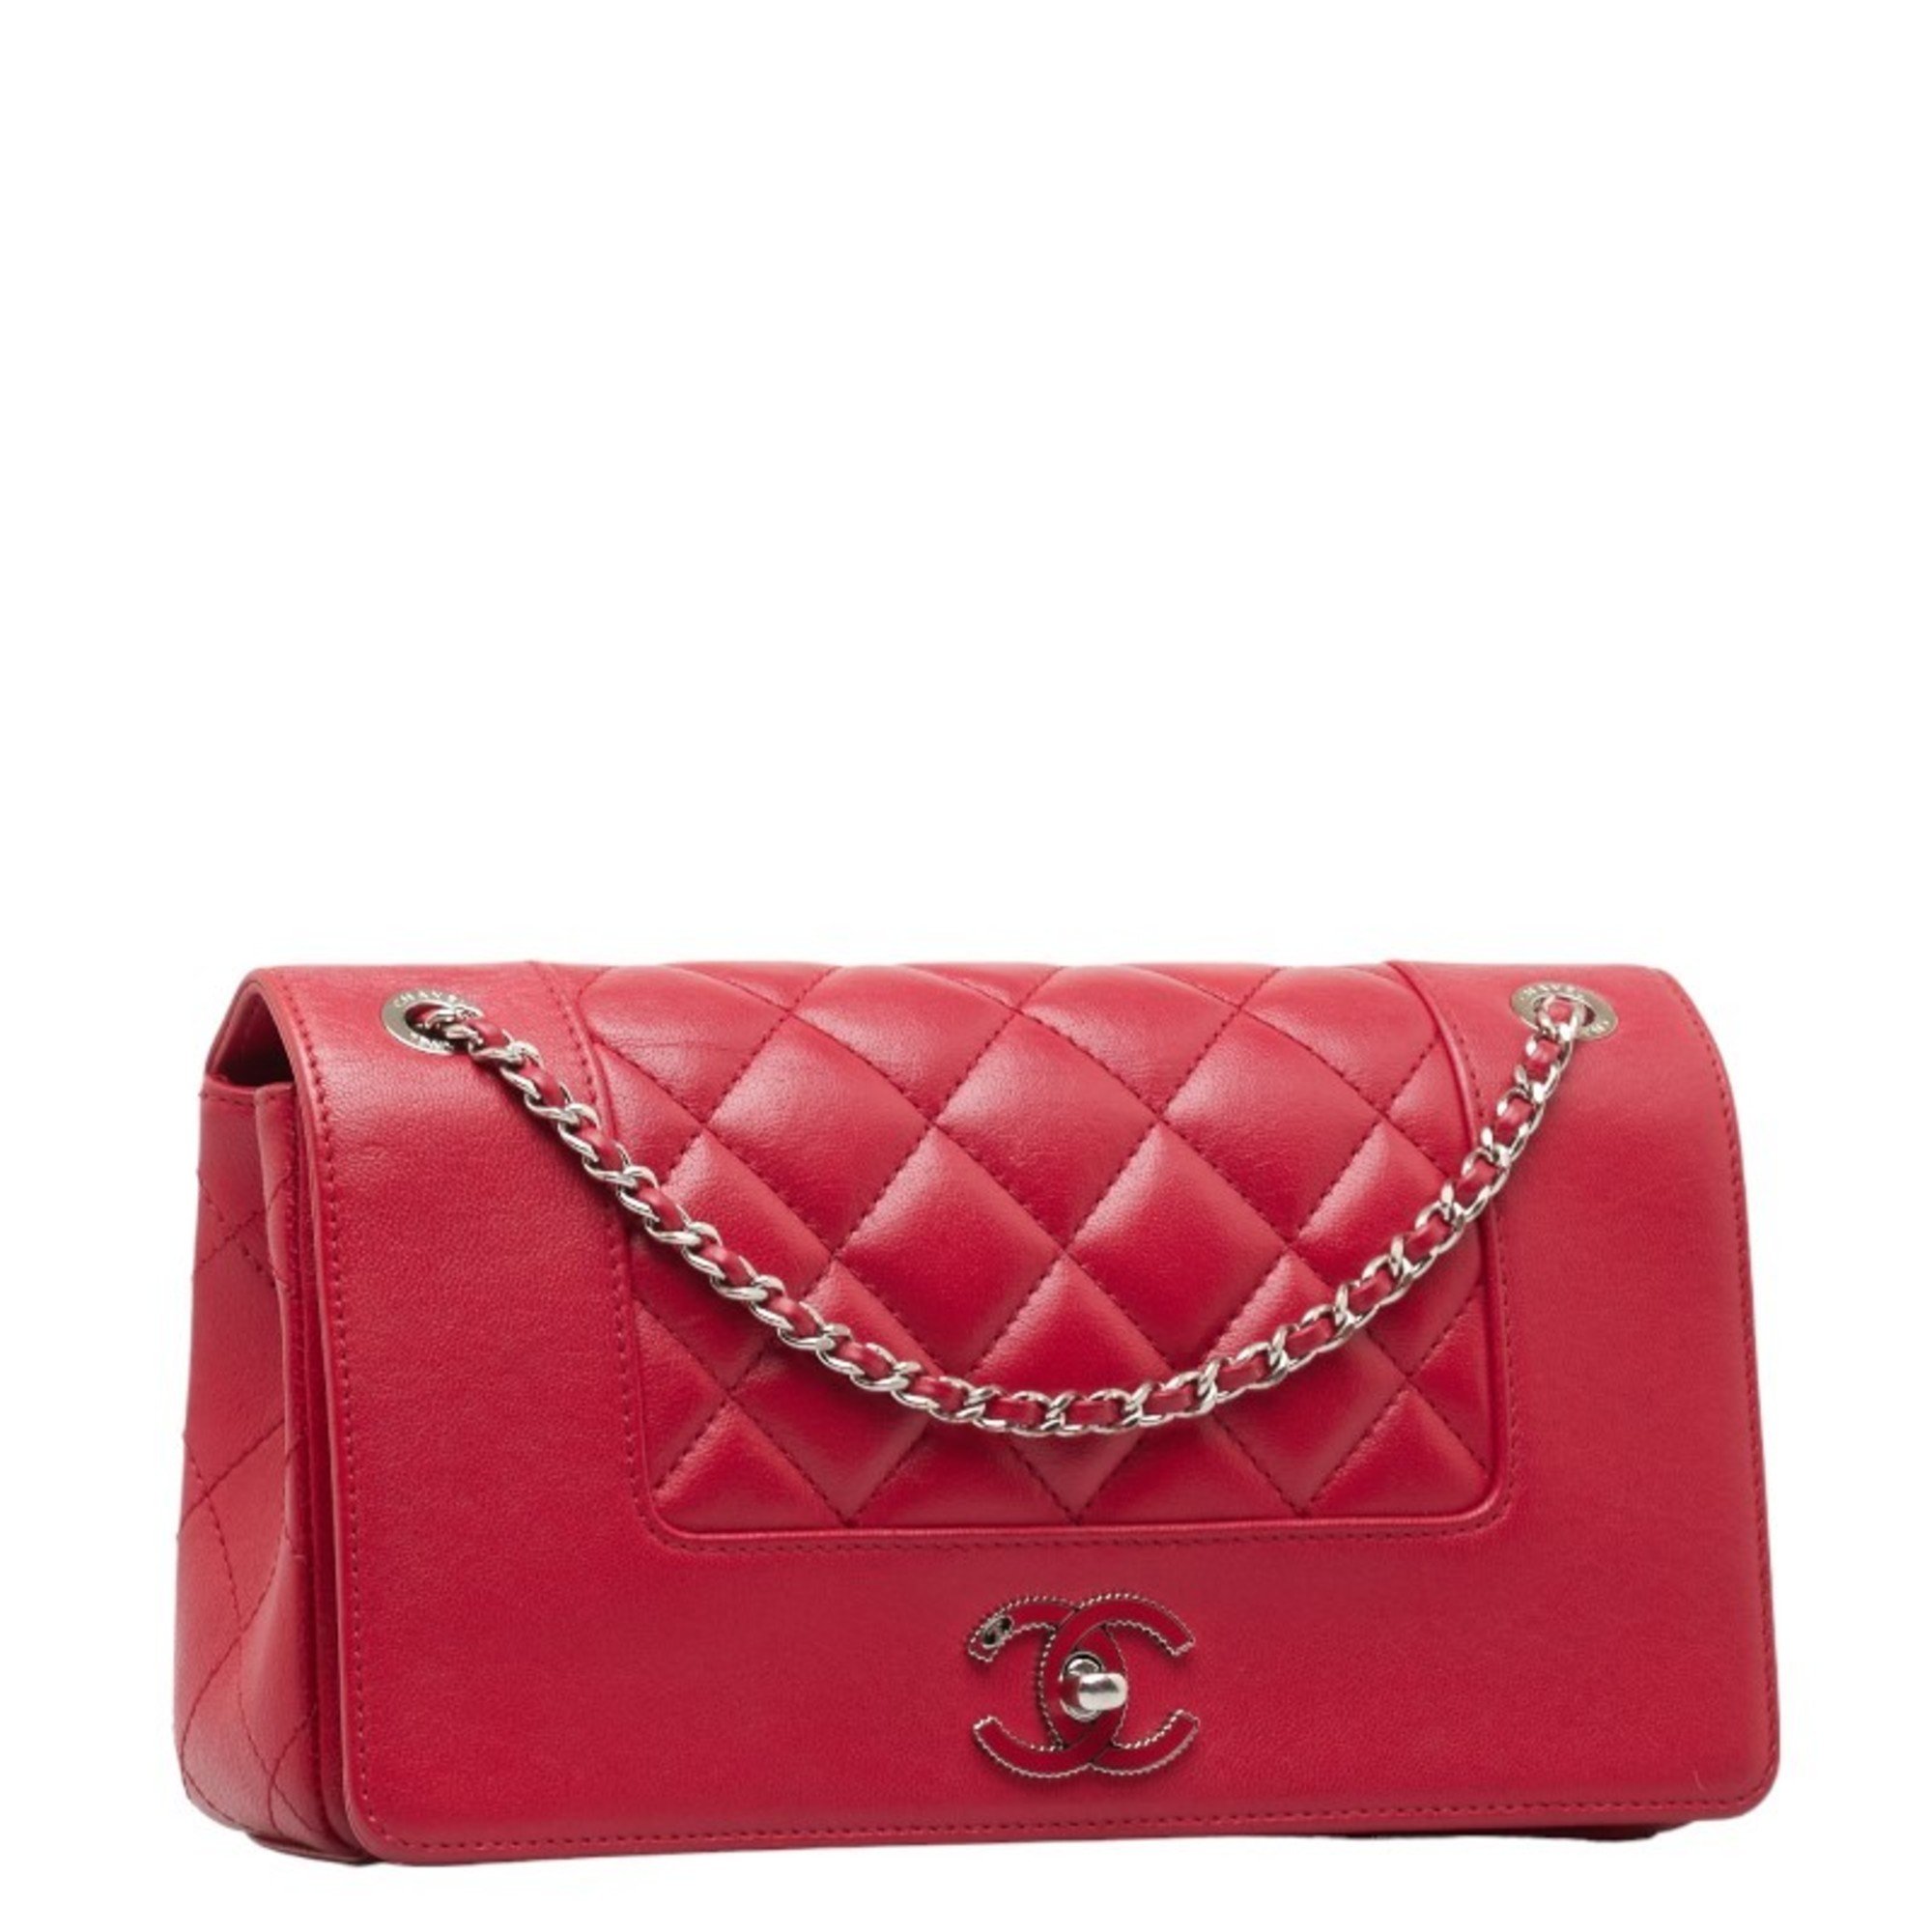 Chanel Matelasse Coco Mark Chain Shoulder Bag Red Leather Women's CHANEL